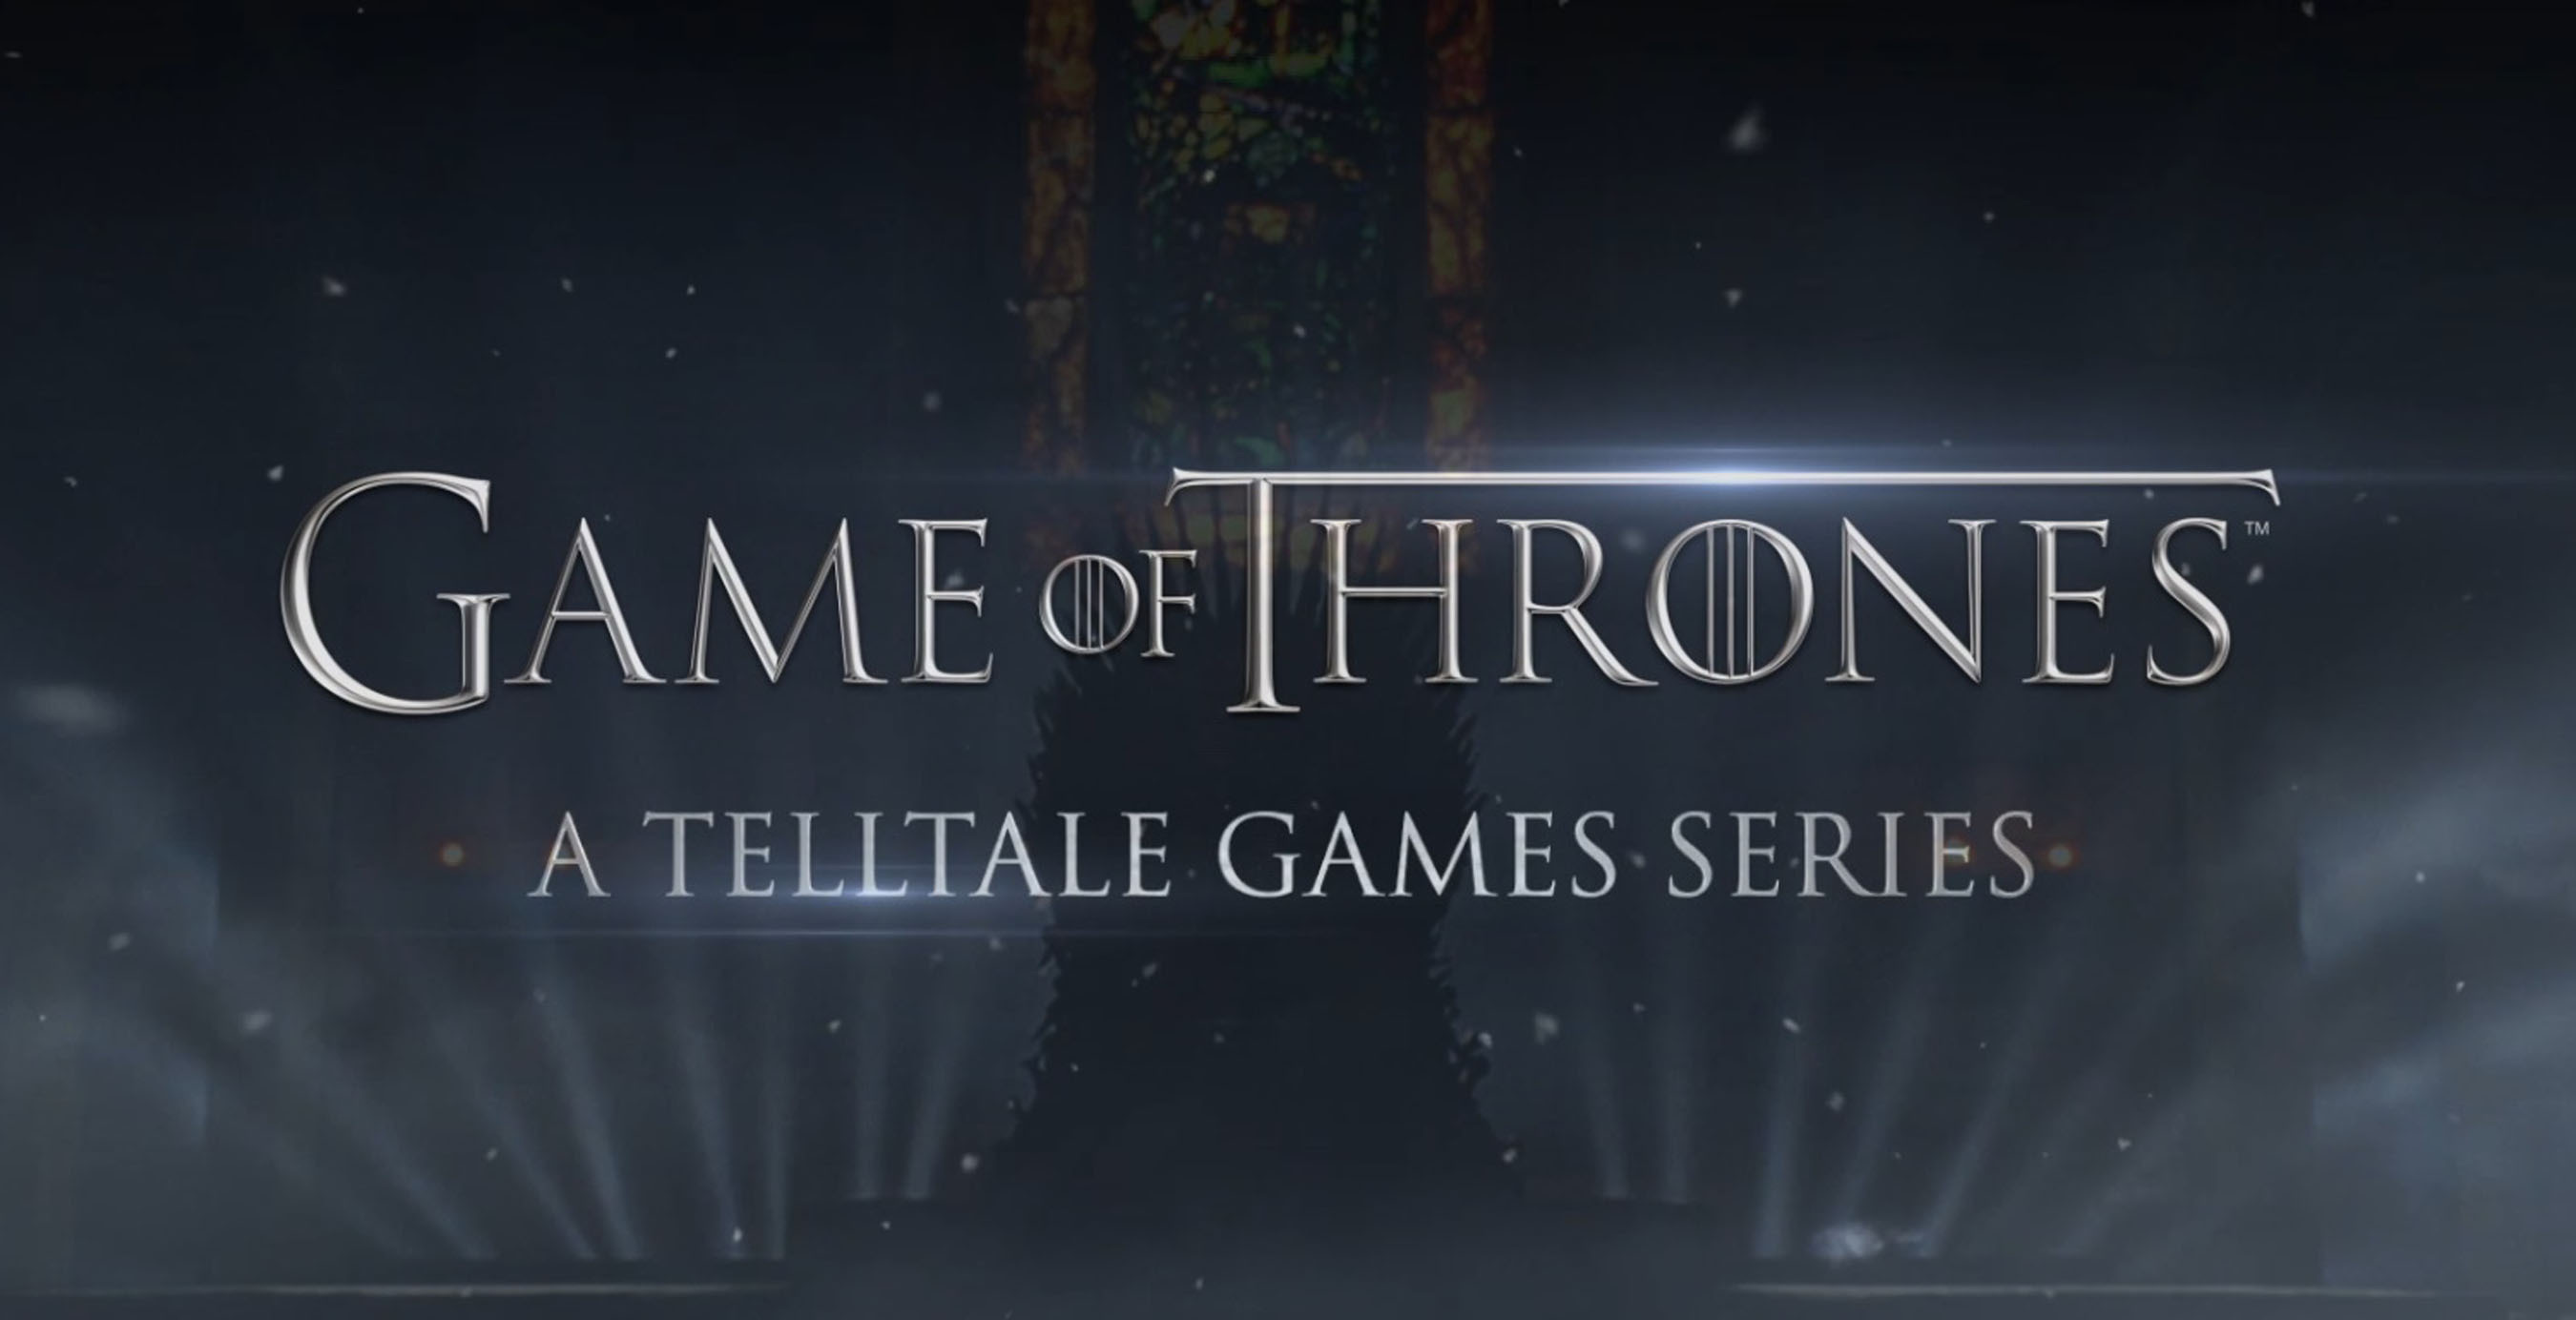 Telltale Games and HBO working to create an all-new episodic game series based on 'Game of Thrones' for 2014. (PRNewsFoto/Telltale, Inc.) (PRNewsFoto/TELLTALE, INC.)